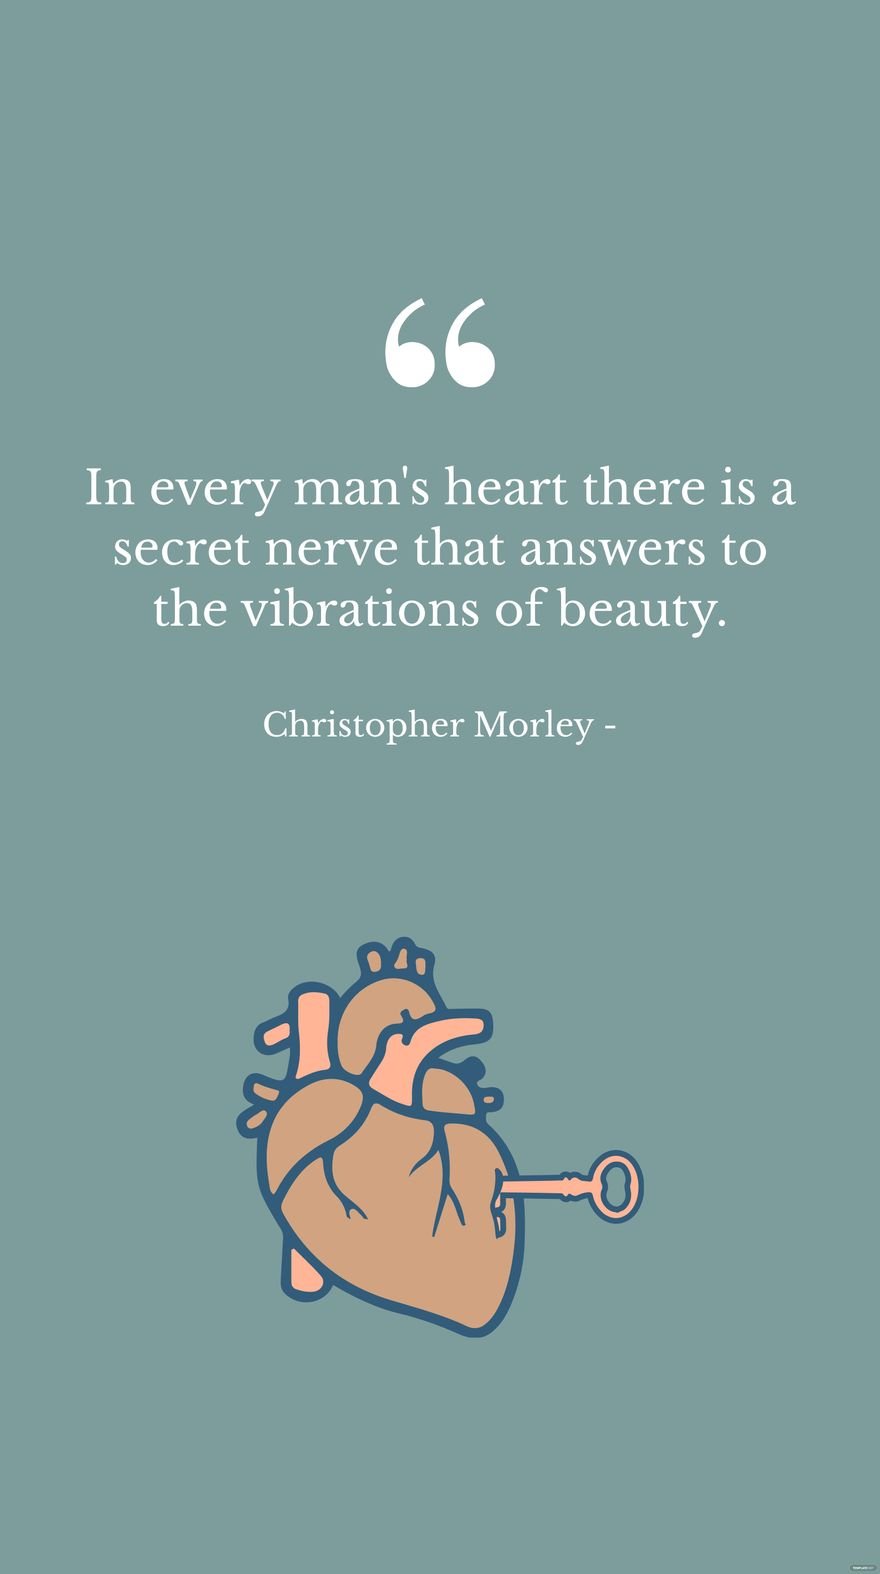 Christopher Morley - In every man's heart there is a secret nerve that answers to the vibrations of beauty. in JPG